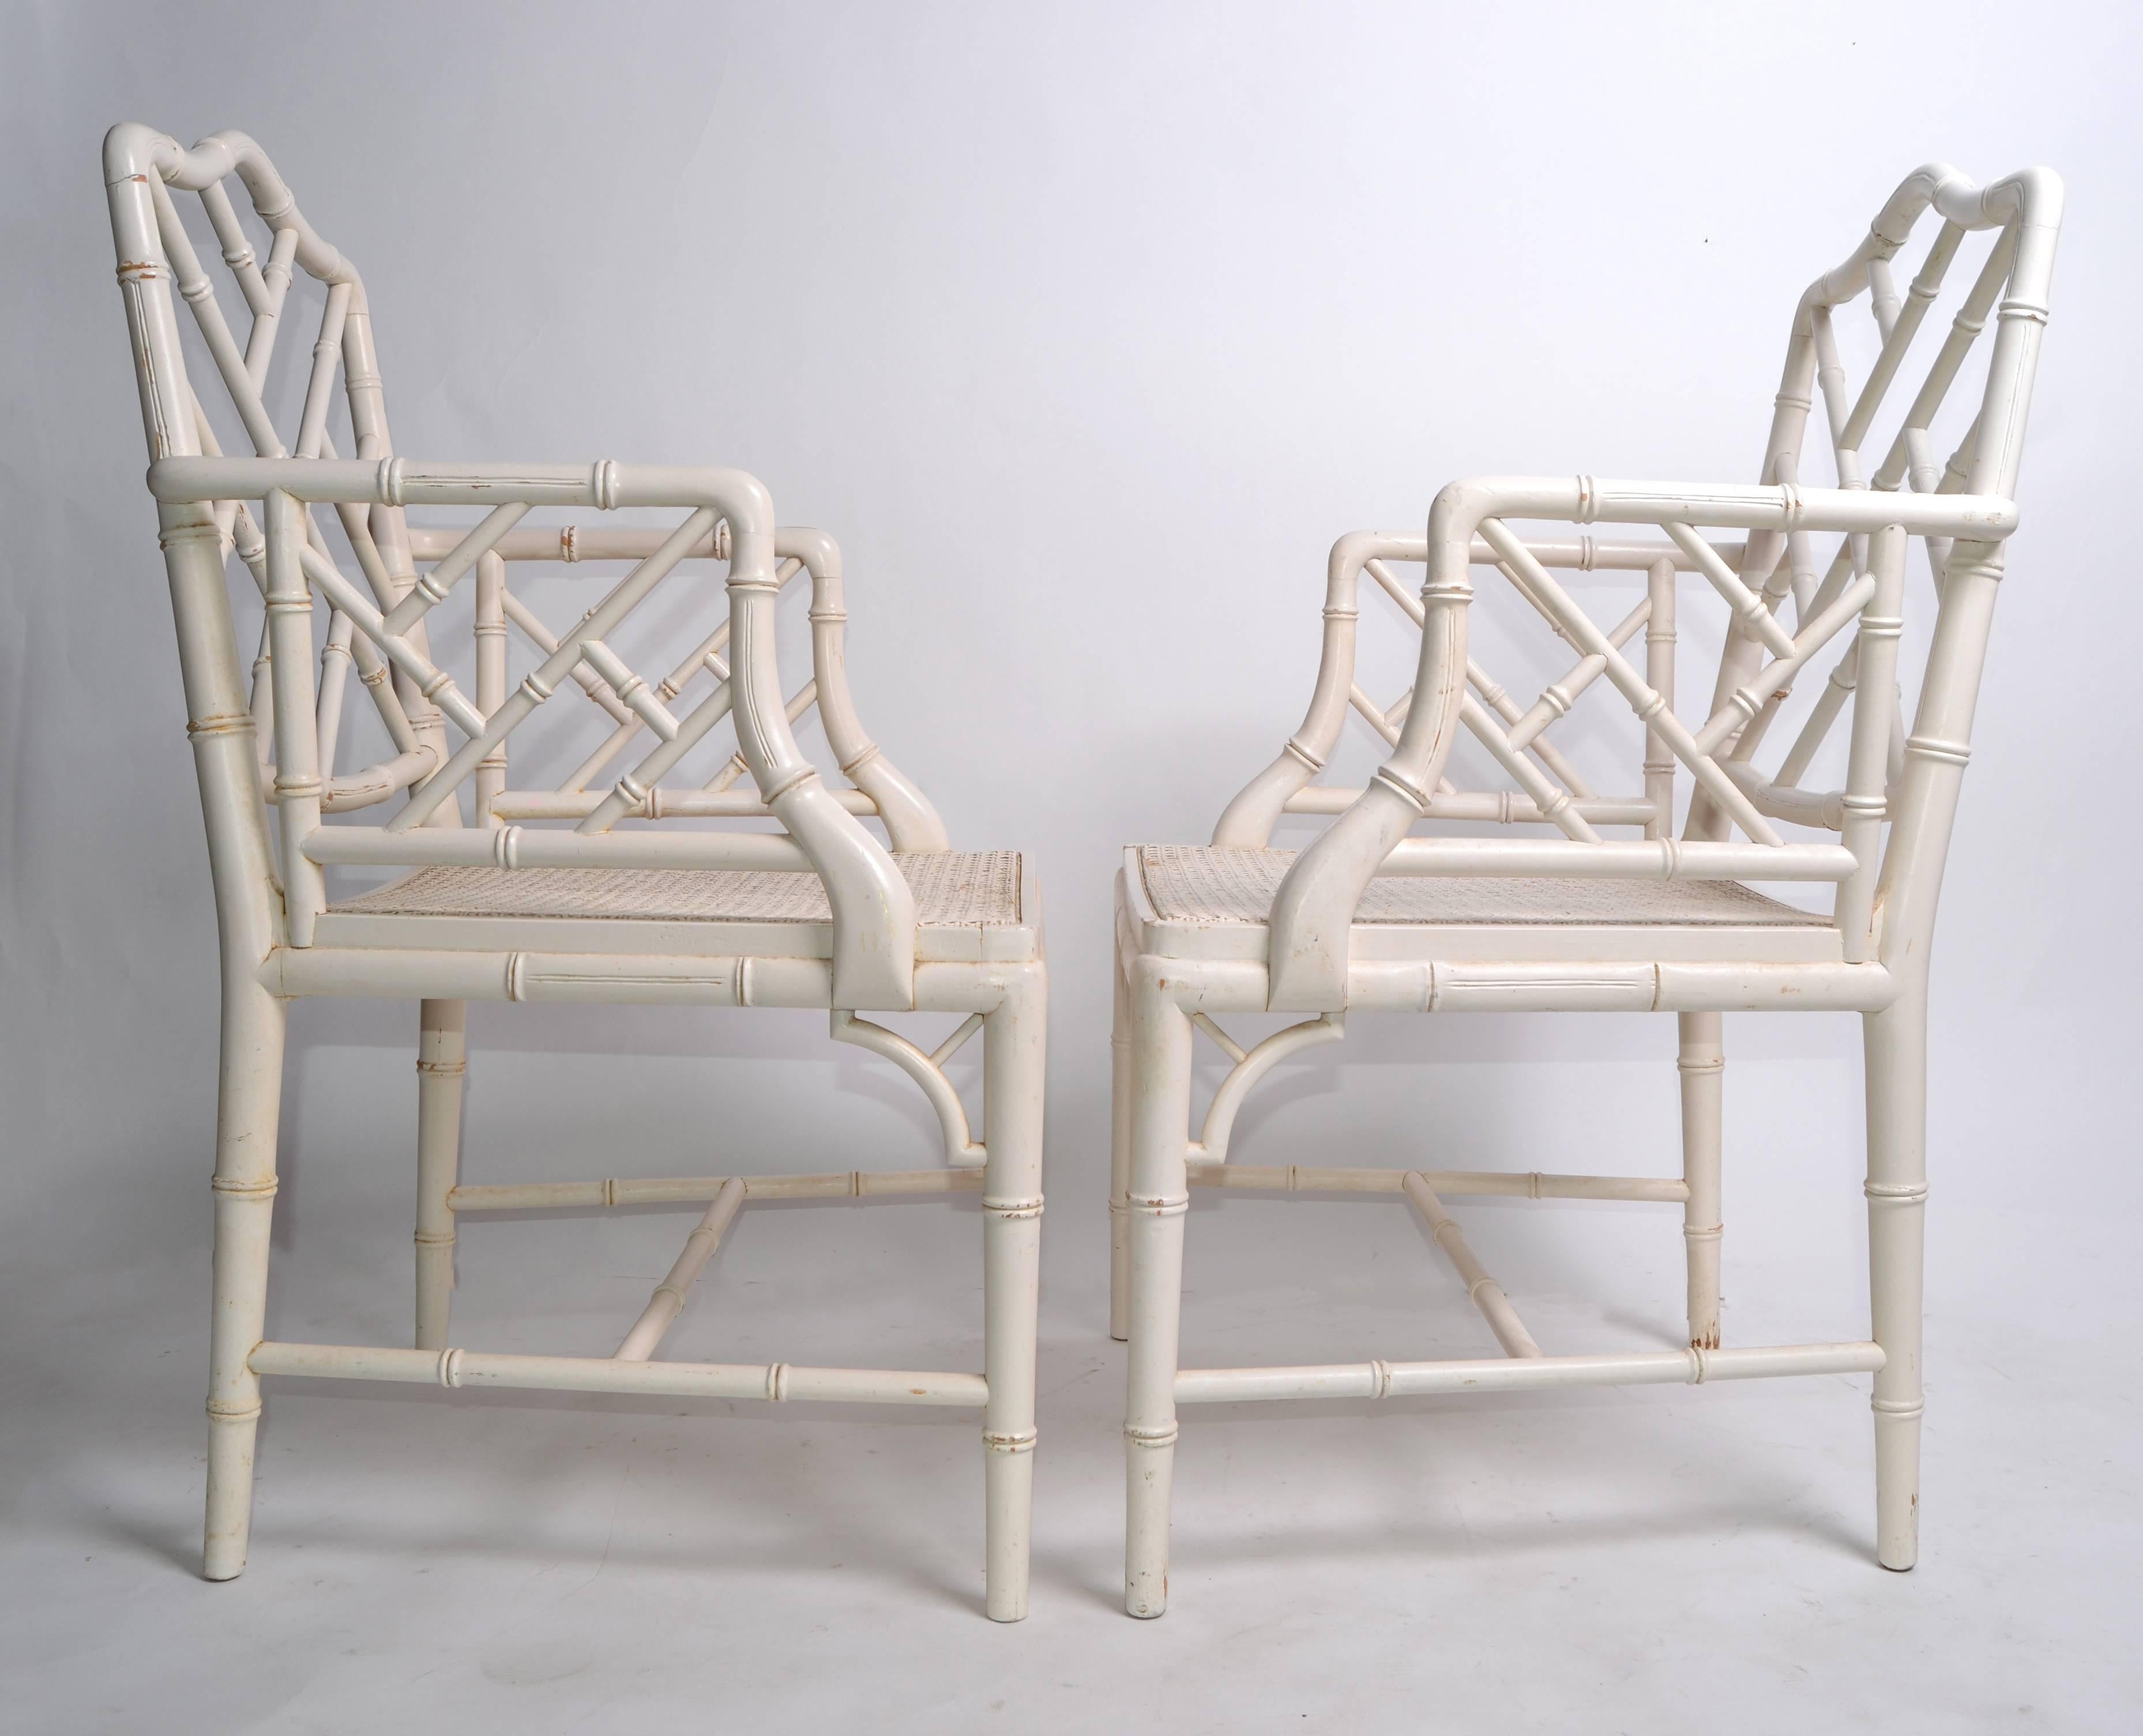 American Hollywood Regency Faux Bamboo Chippendale Armchairs, a Pair